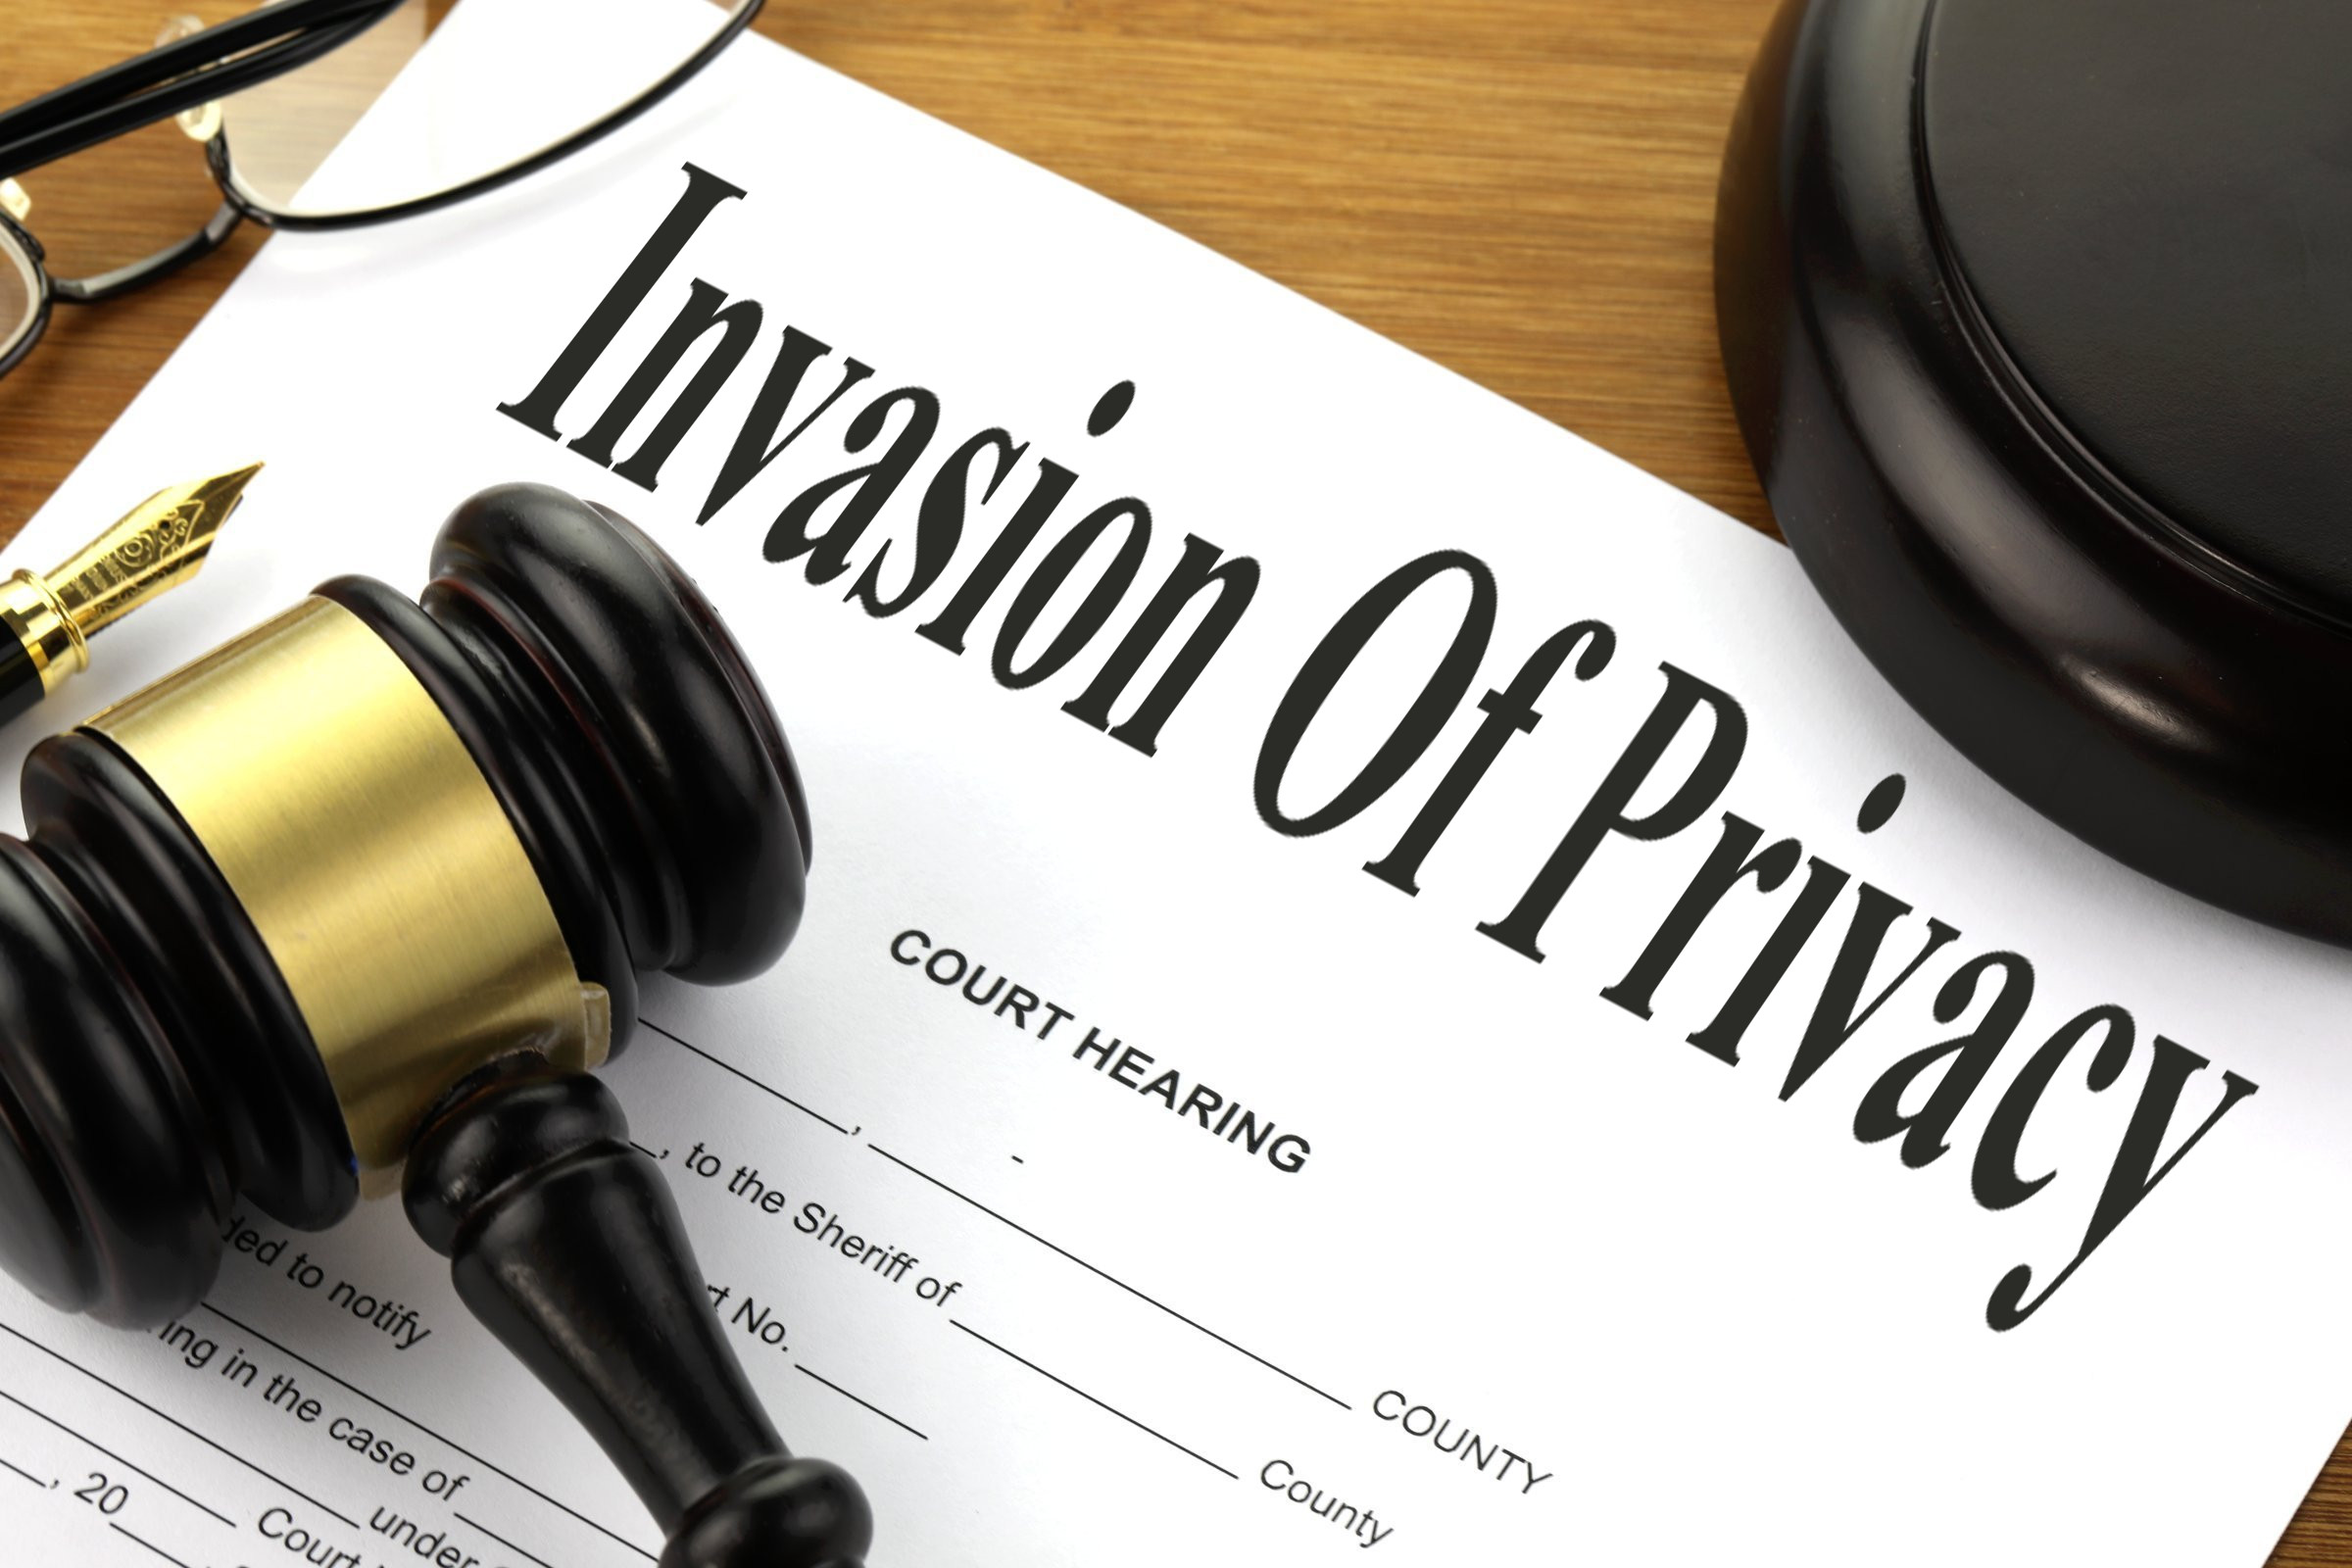 Invasion Of Privacy - Free of Charge Creative Commons Legal 1 image